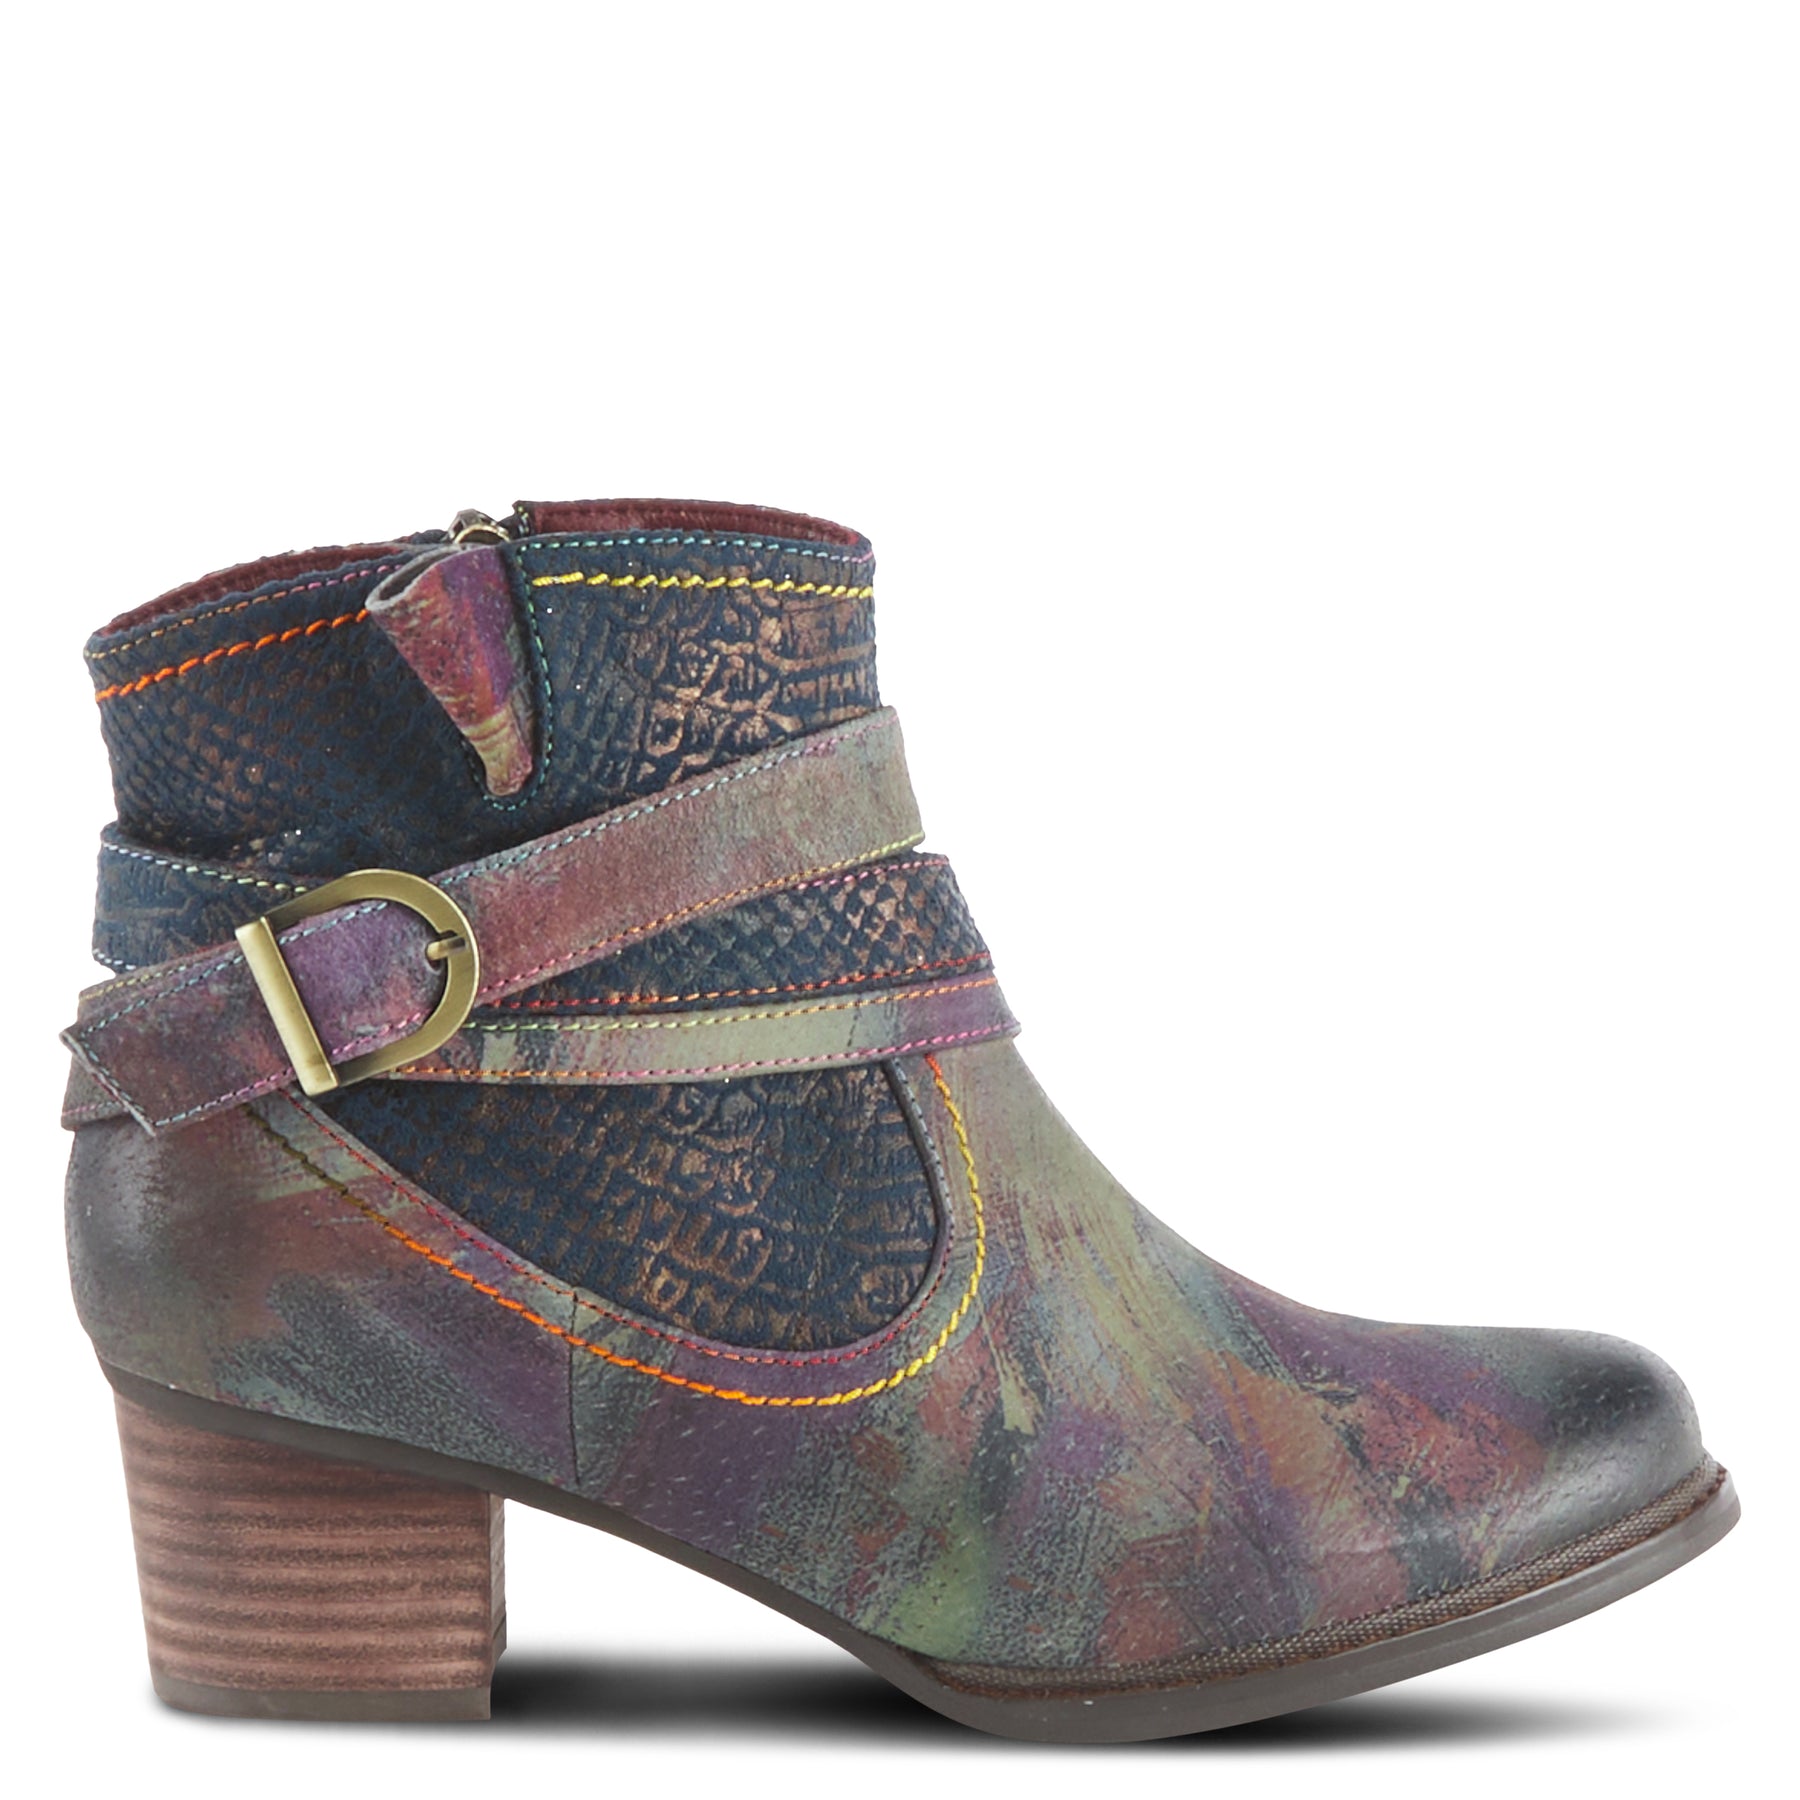 CAMEL SHAZZAM BOOTIE by L'ARTISTE – Spring Step Shoes